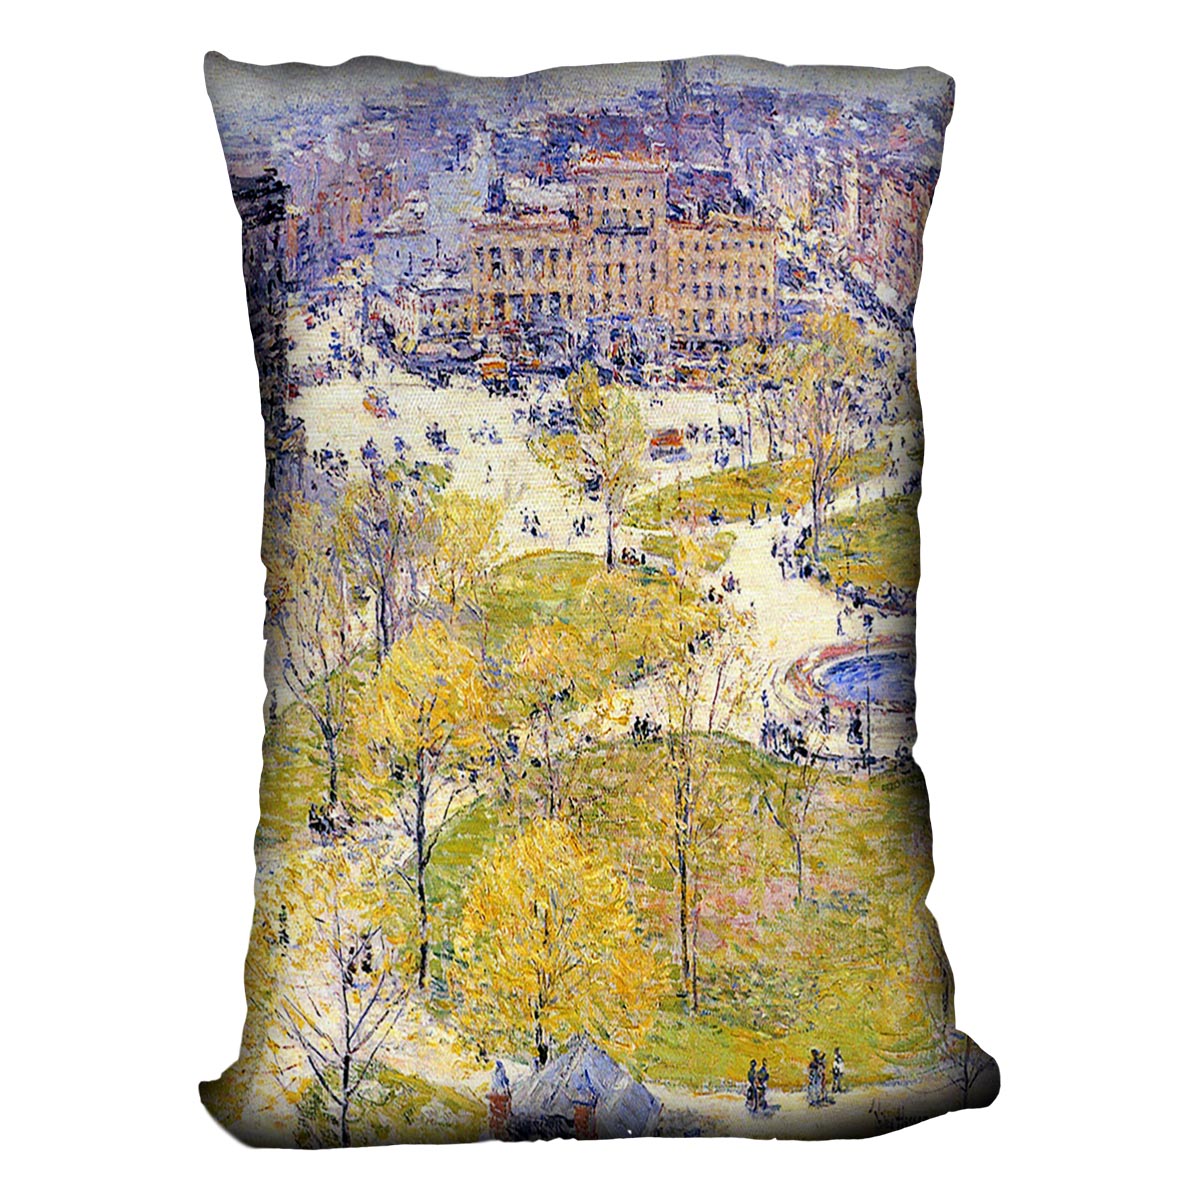 Union Square in Spring by Hassam Cushion - Canvas Art Rocks - 4